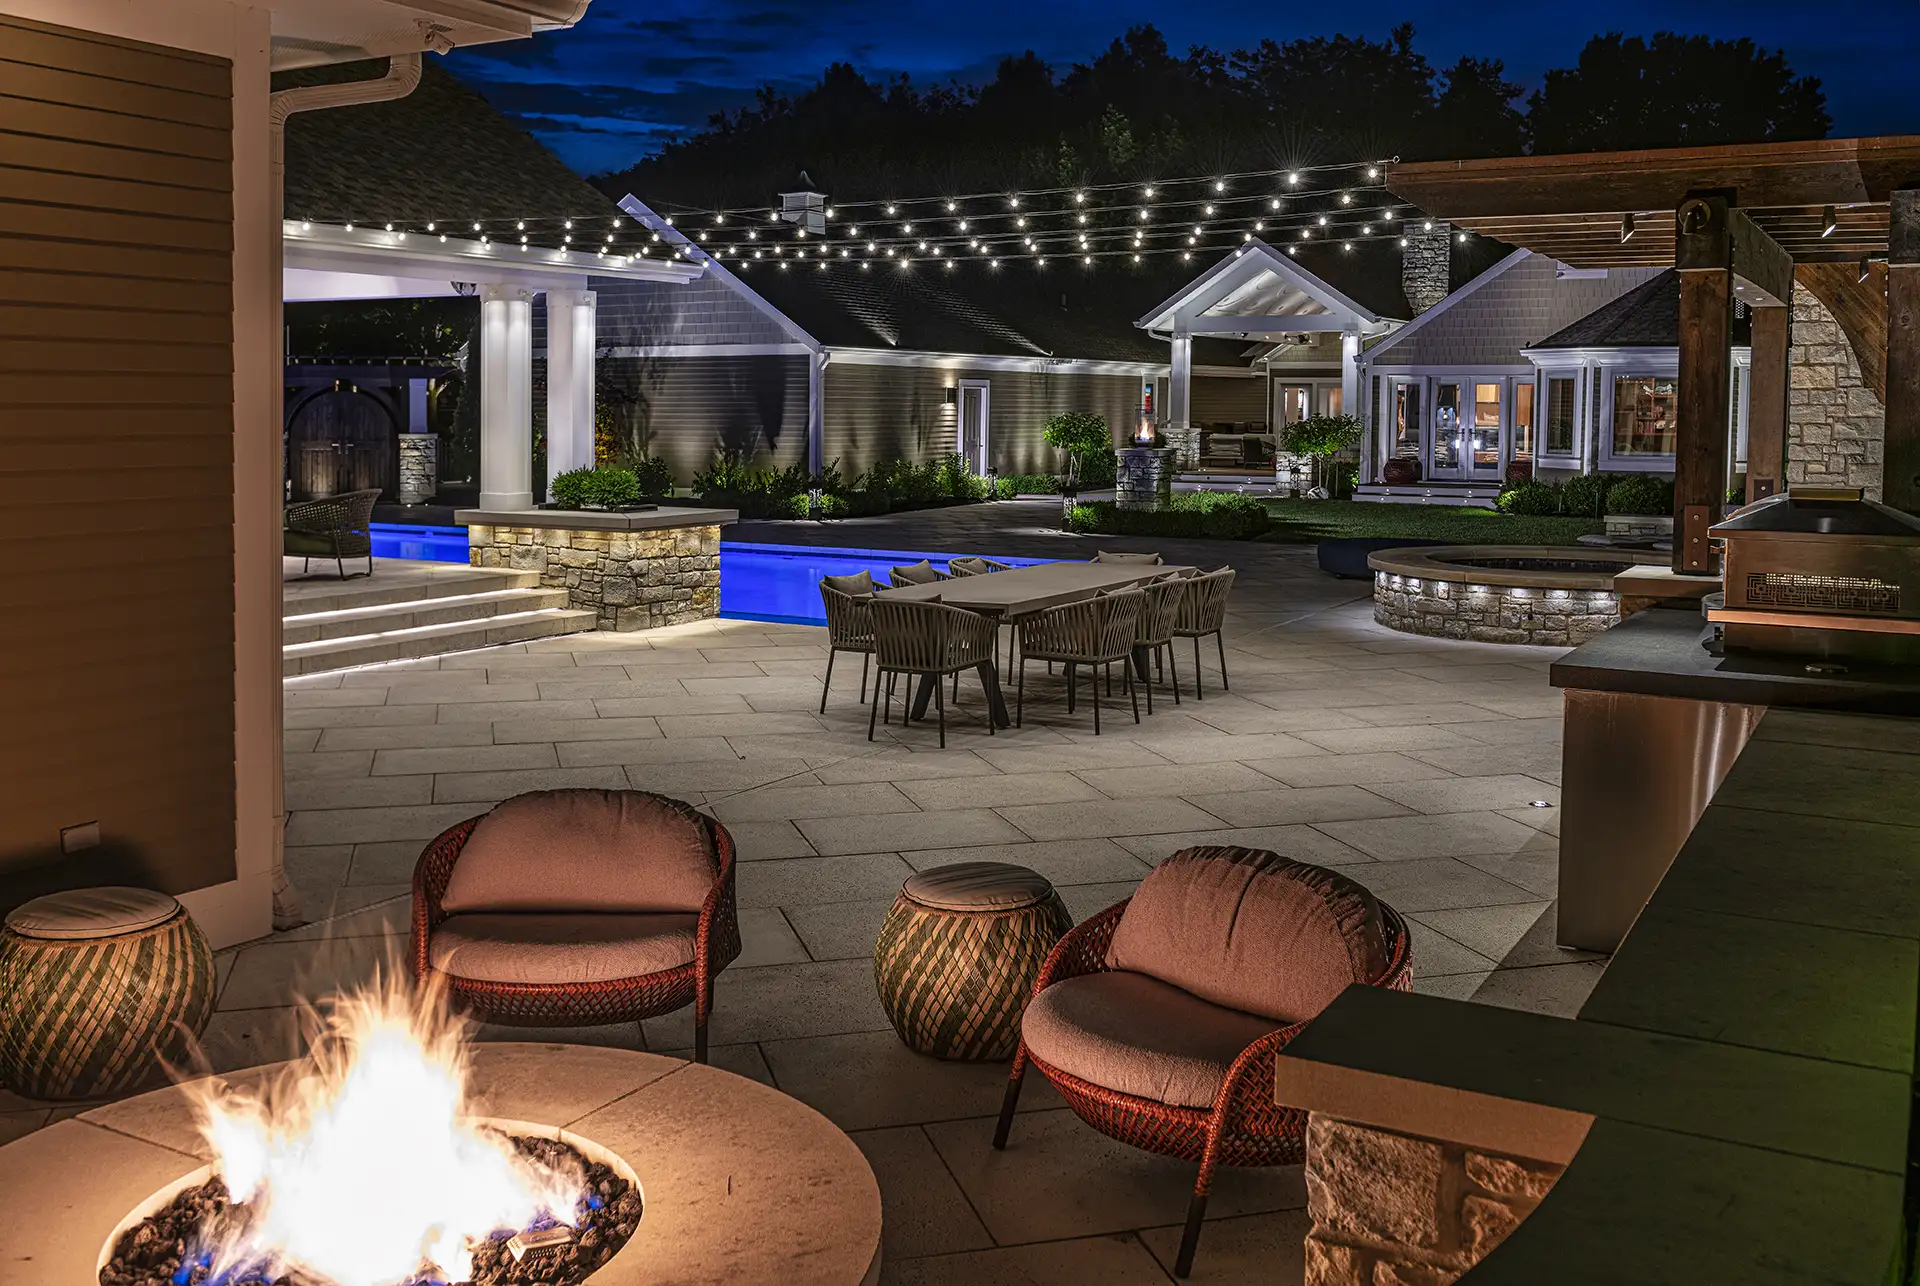 Victory Lane image 15 patio seating area fire pit Lighthouse Outdoor Lighting and Audio OH Columbus Cincinnati Dayton